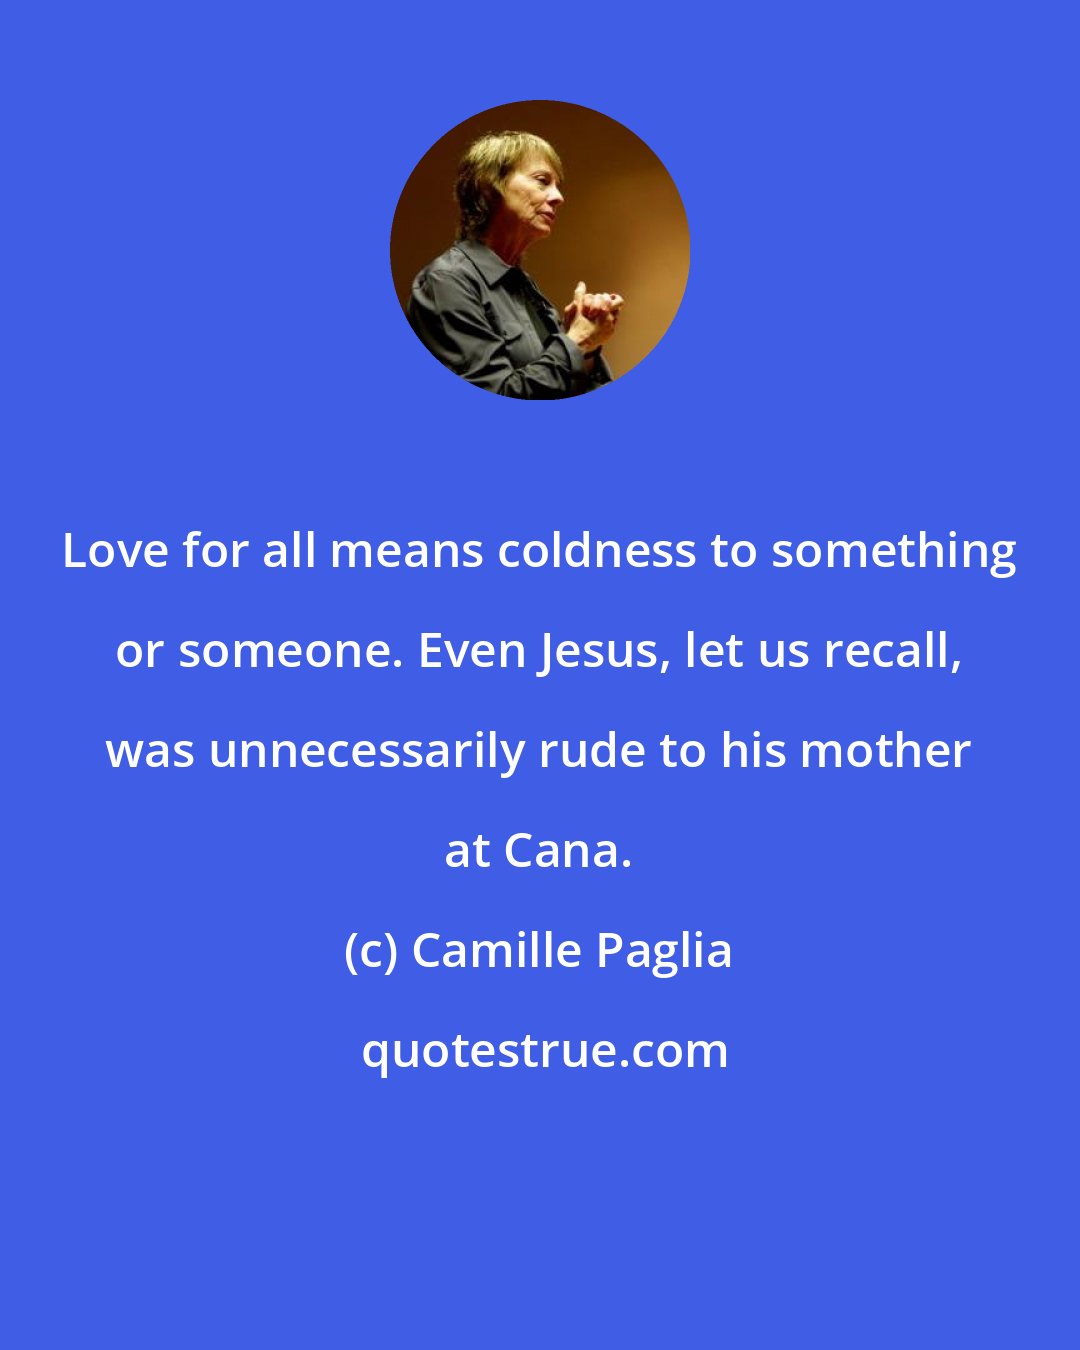 Camille Paglia: Love for all means coldness to something or someone. Even Jesus, let us recall, was unnecessarily rude to his mother at Cana.